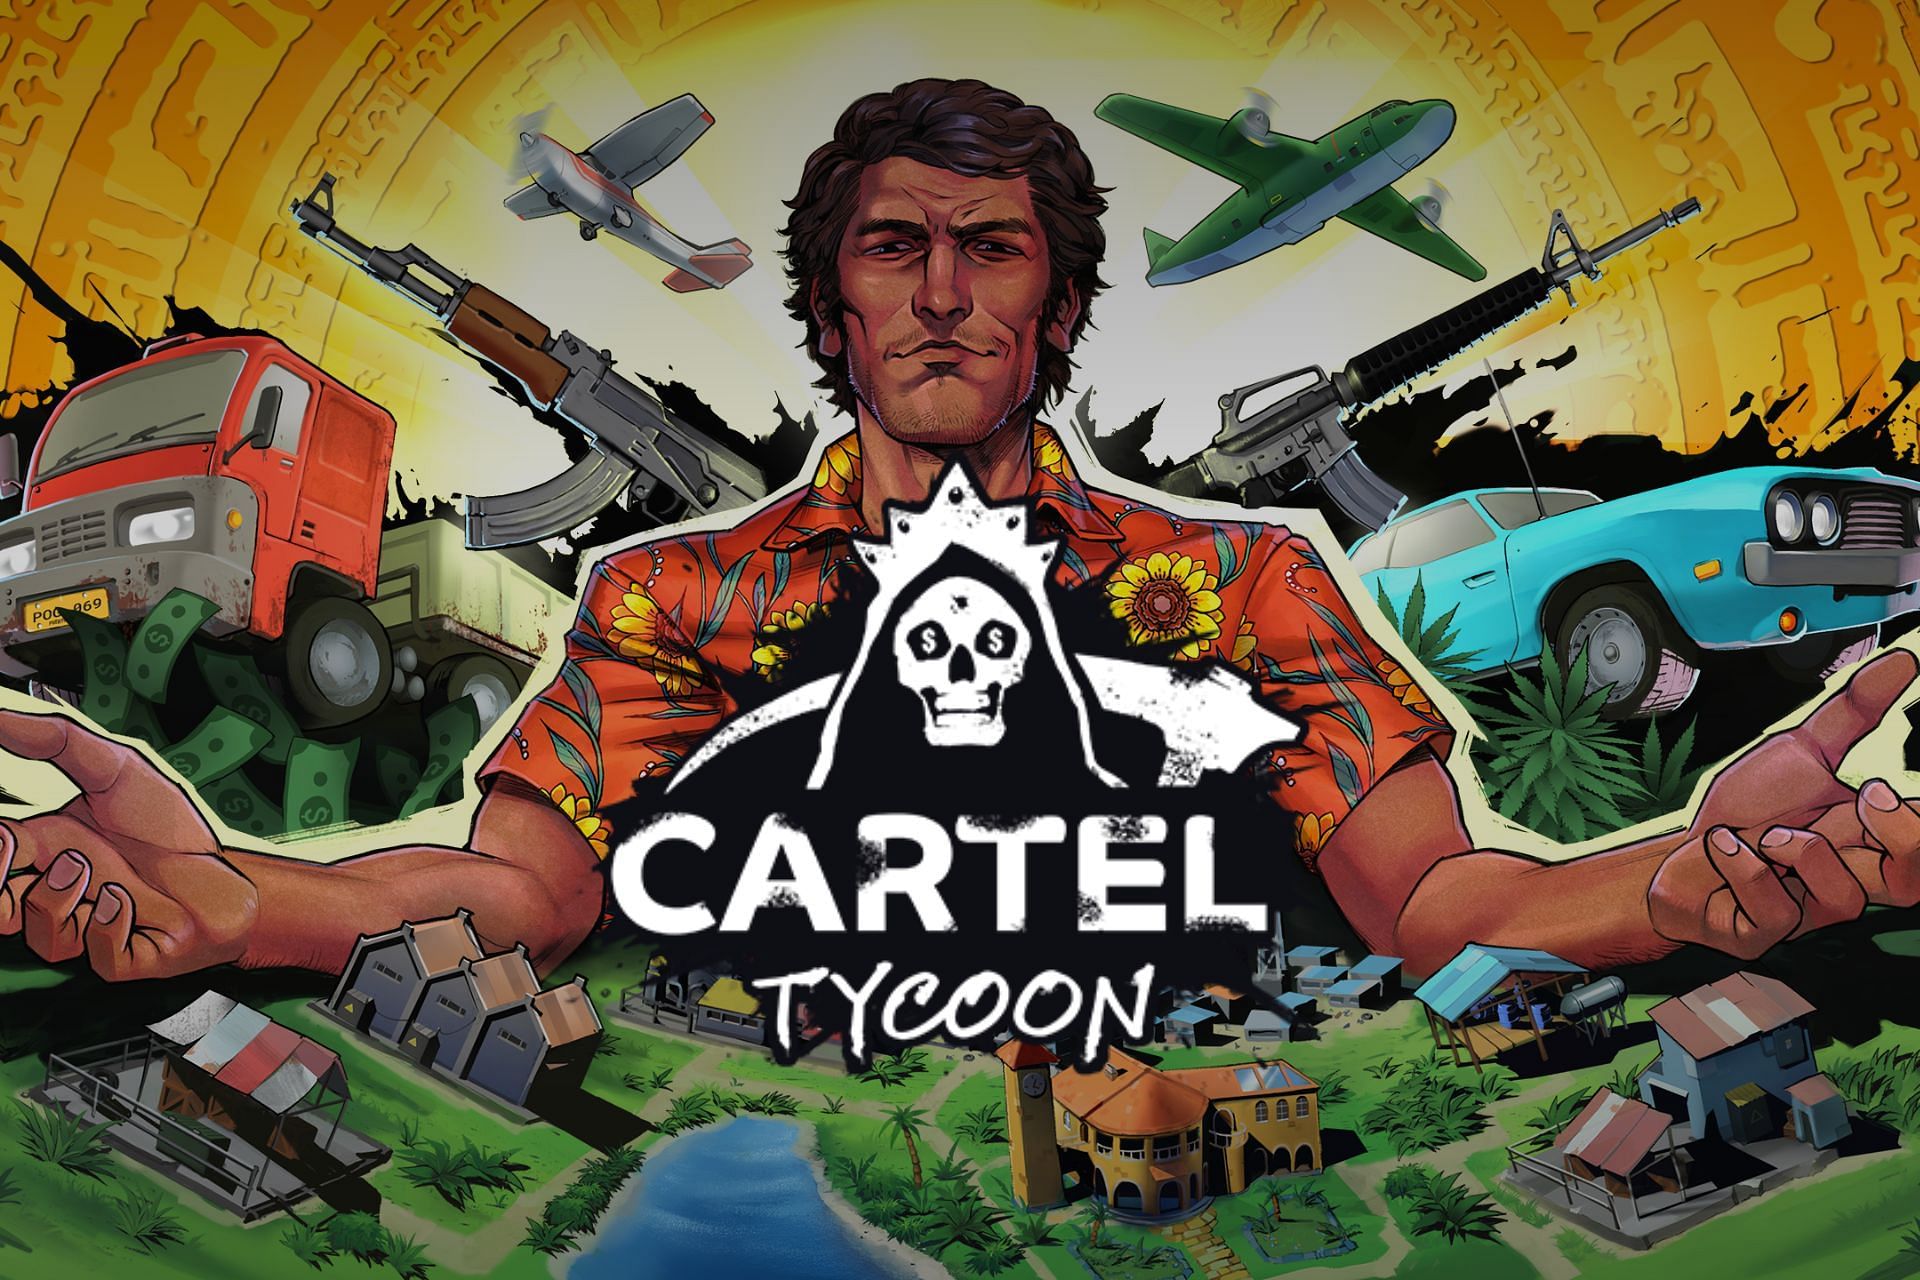 Cartel Tycoon can best be described as a well-flushed out economy simulatory controlled by drug lords (Image via tinyBuild/Cartel Tycoon)